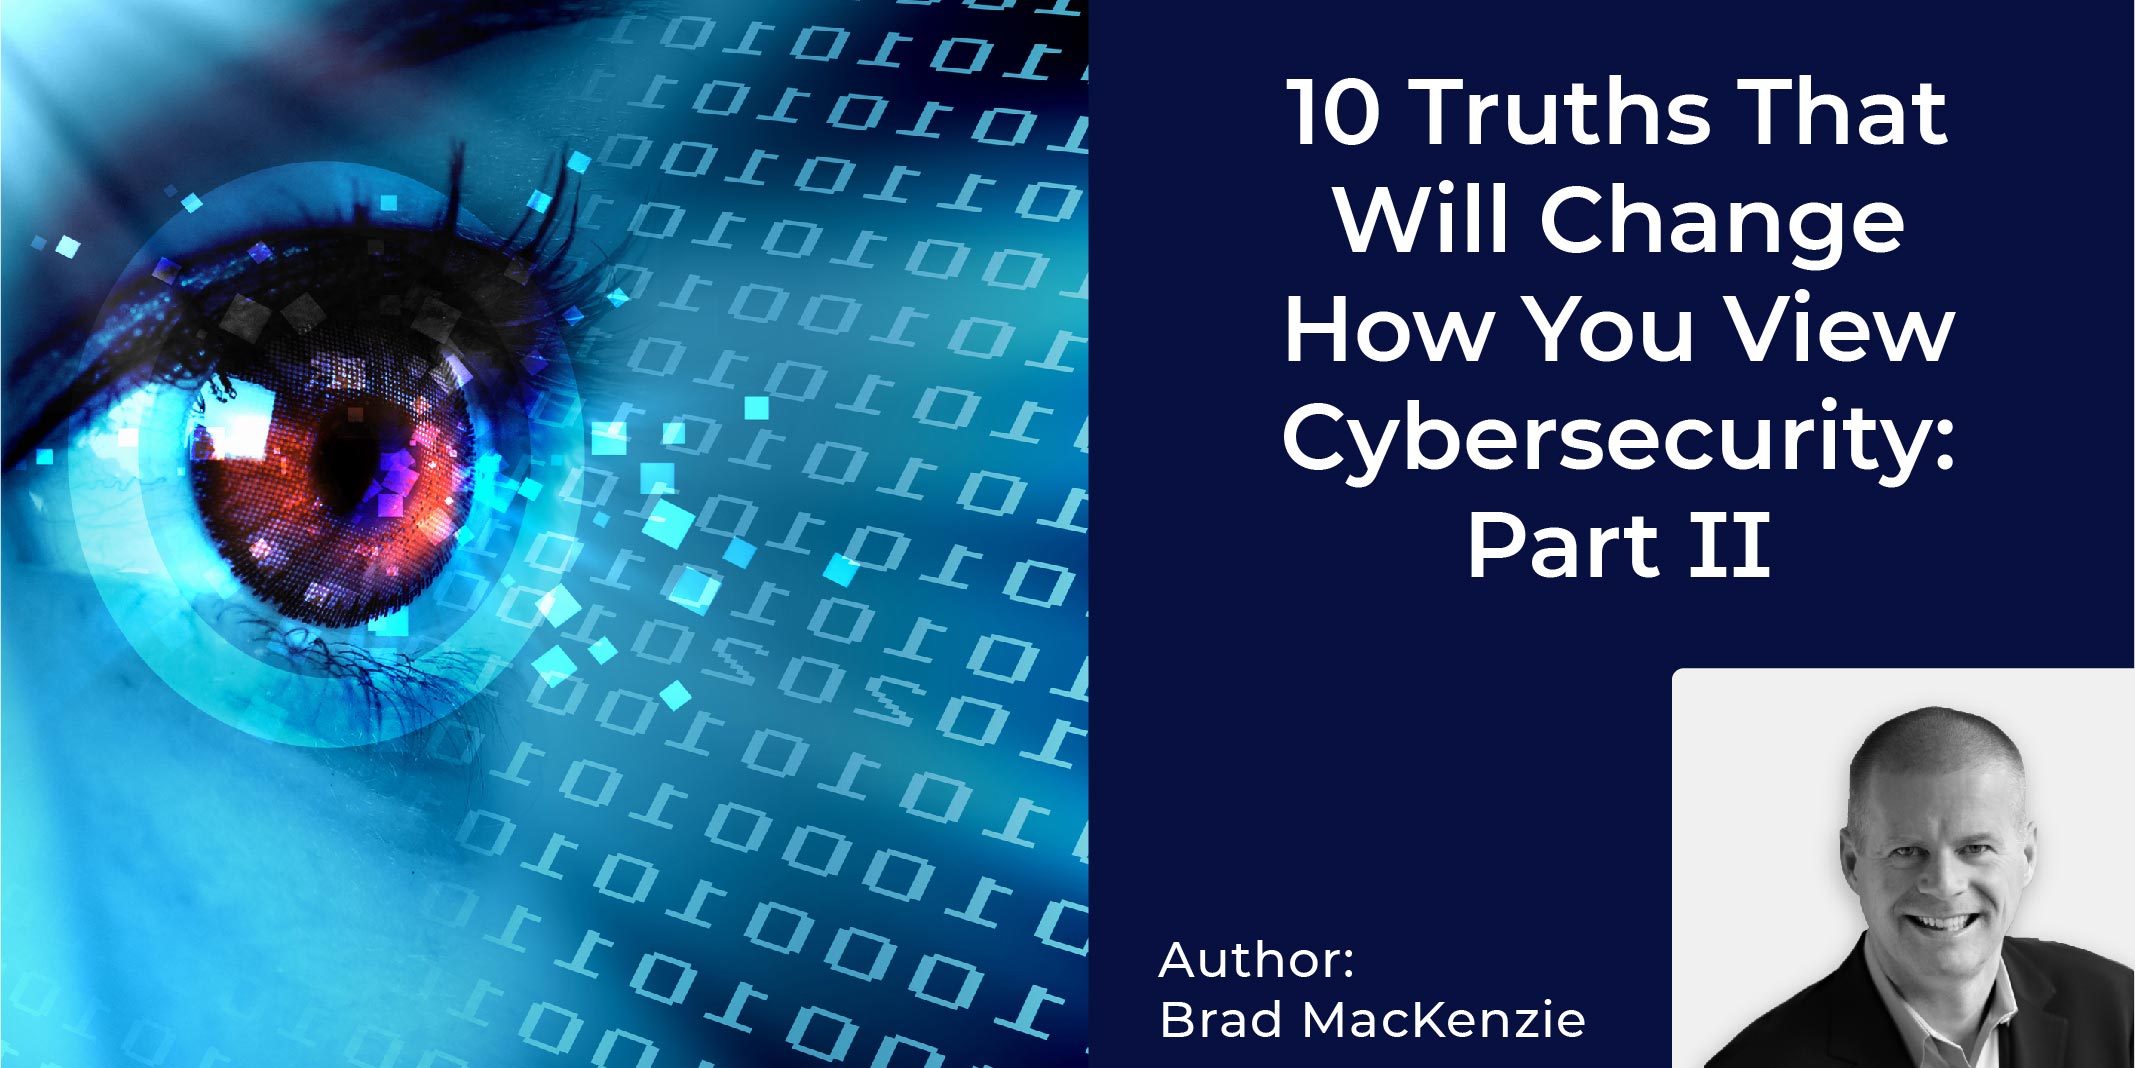 10 Truths That Will Change How You View Cybersecurity: Part II